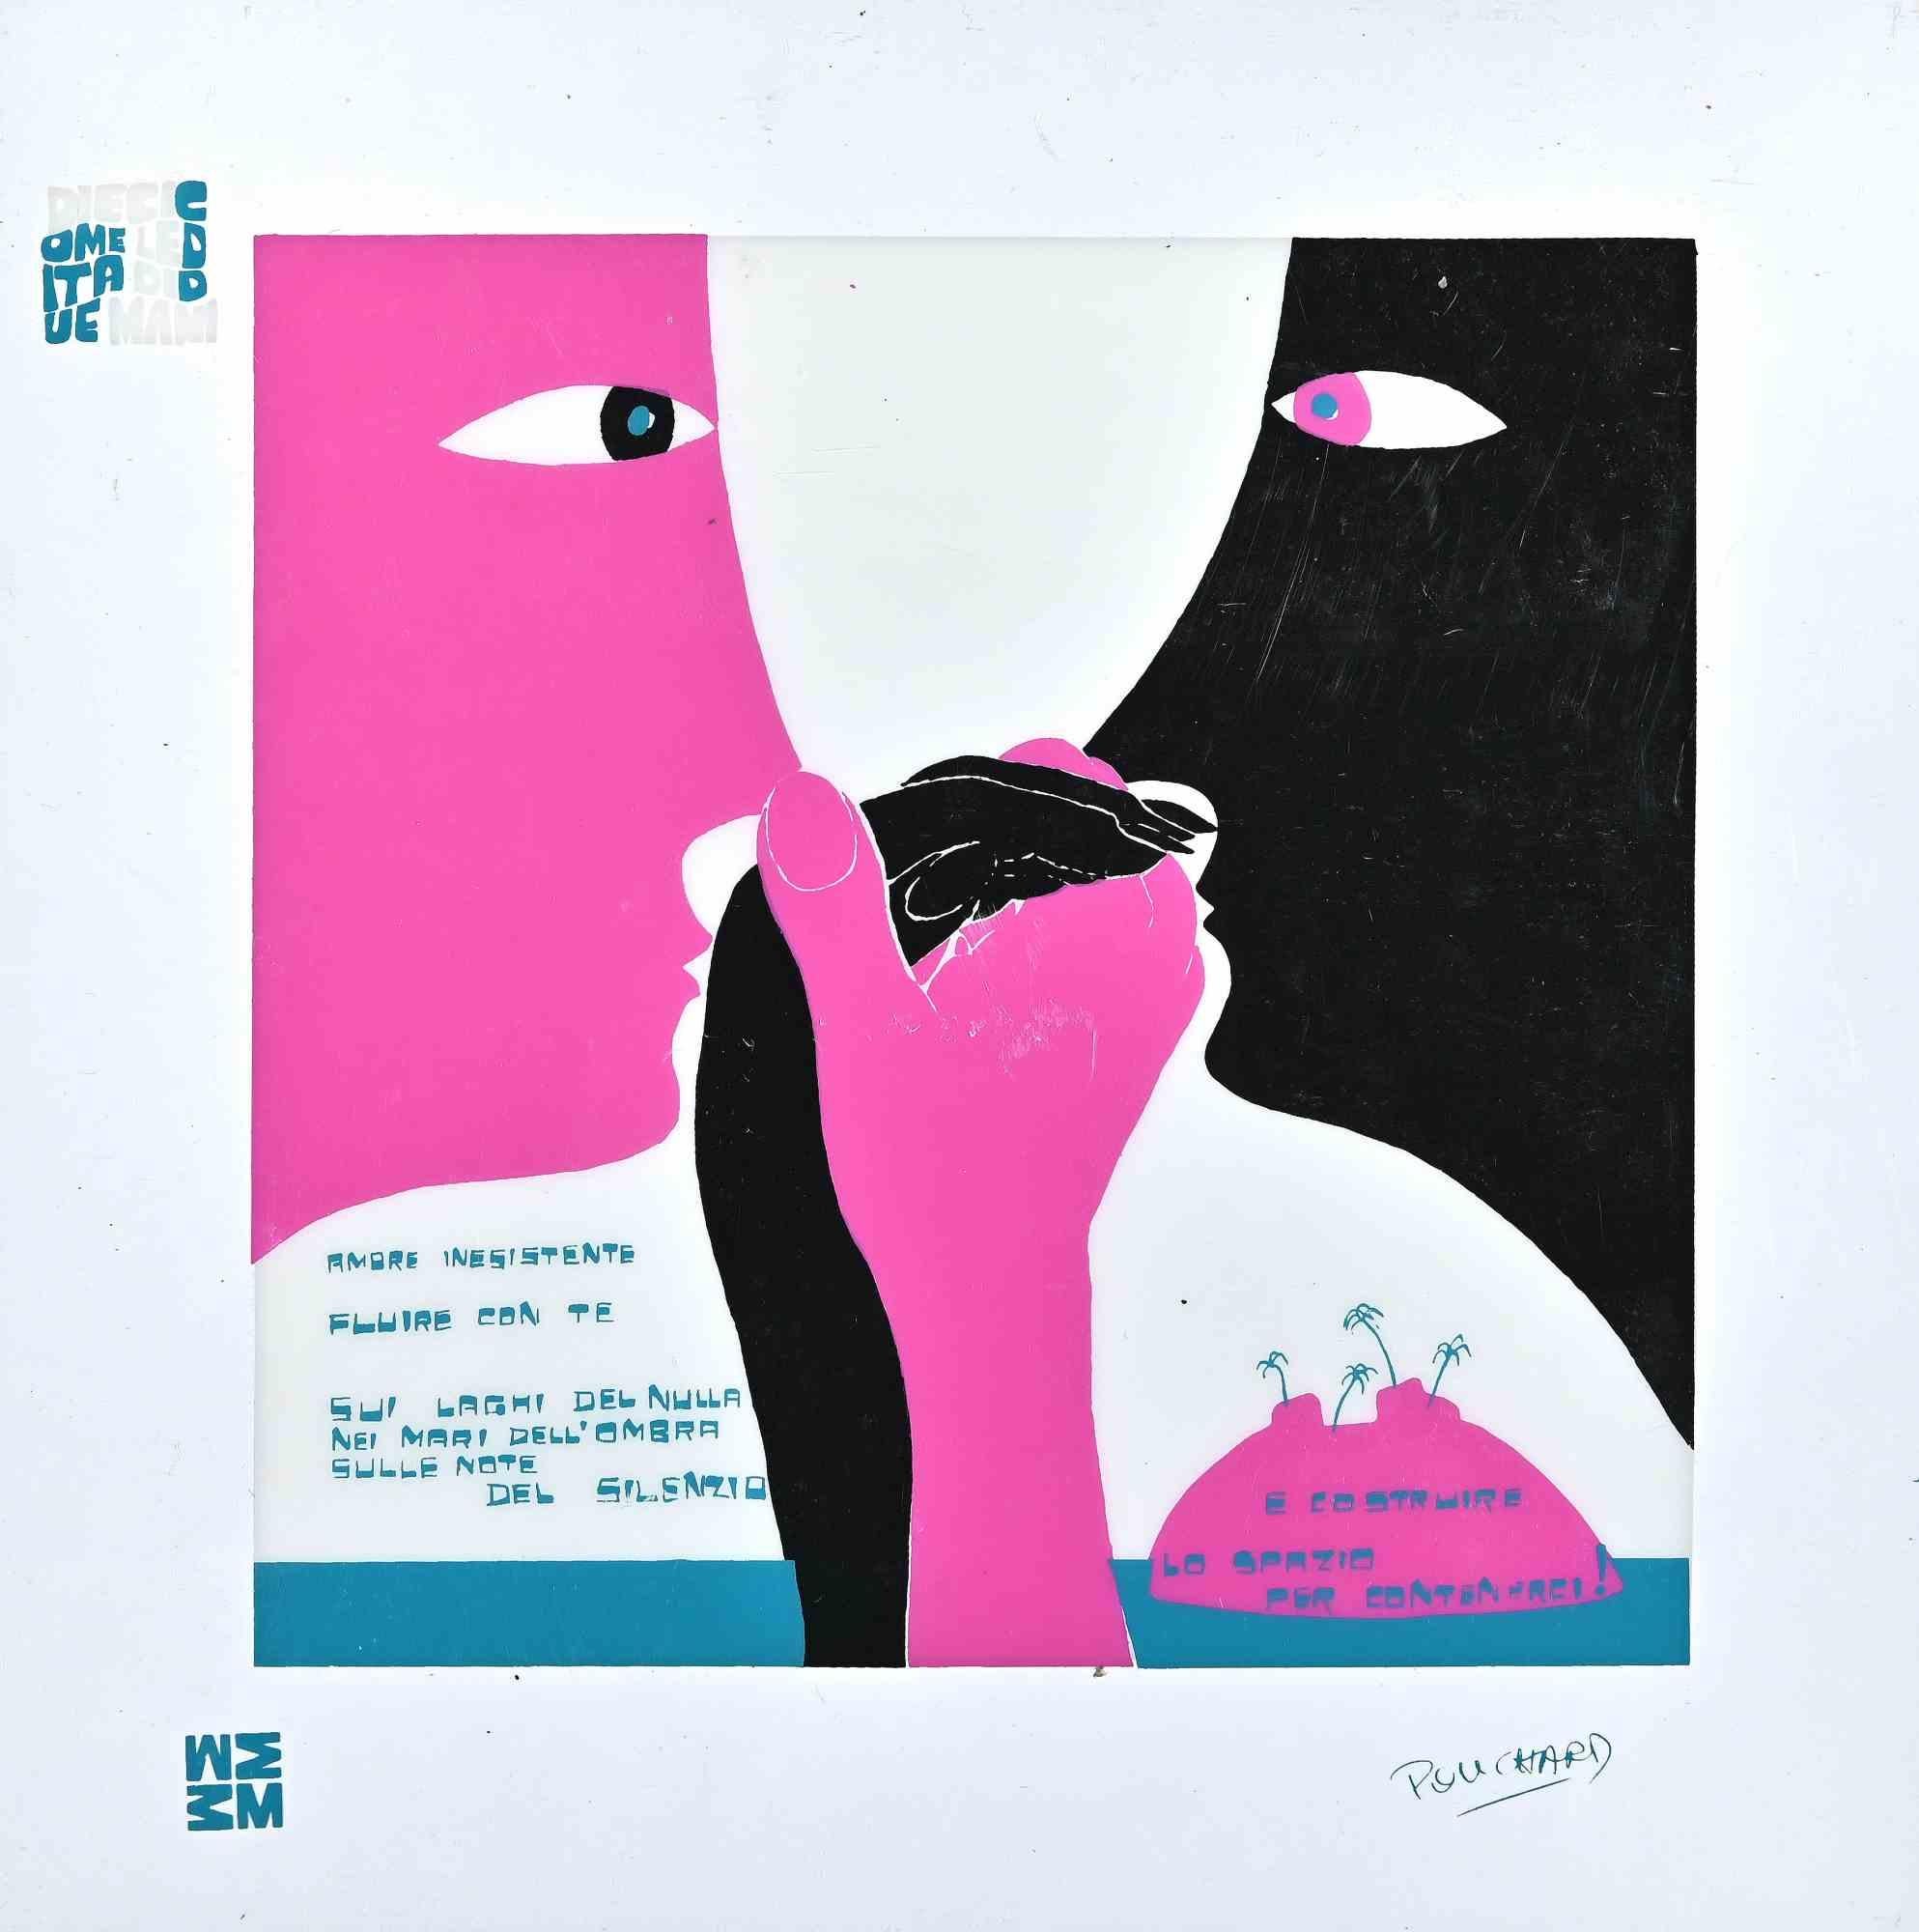 Fluire con Te - Diecicomeleditadiduemani is a color silk-screen print on acetates, realized in  1973  by the artist  Ennio Pouchard  (1928).

Signed on plate  on the lower right.

From the porfolio " Diecicomeleditadiduemani ", containing 10